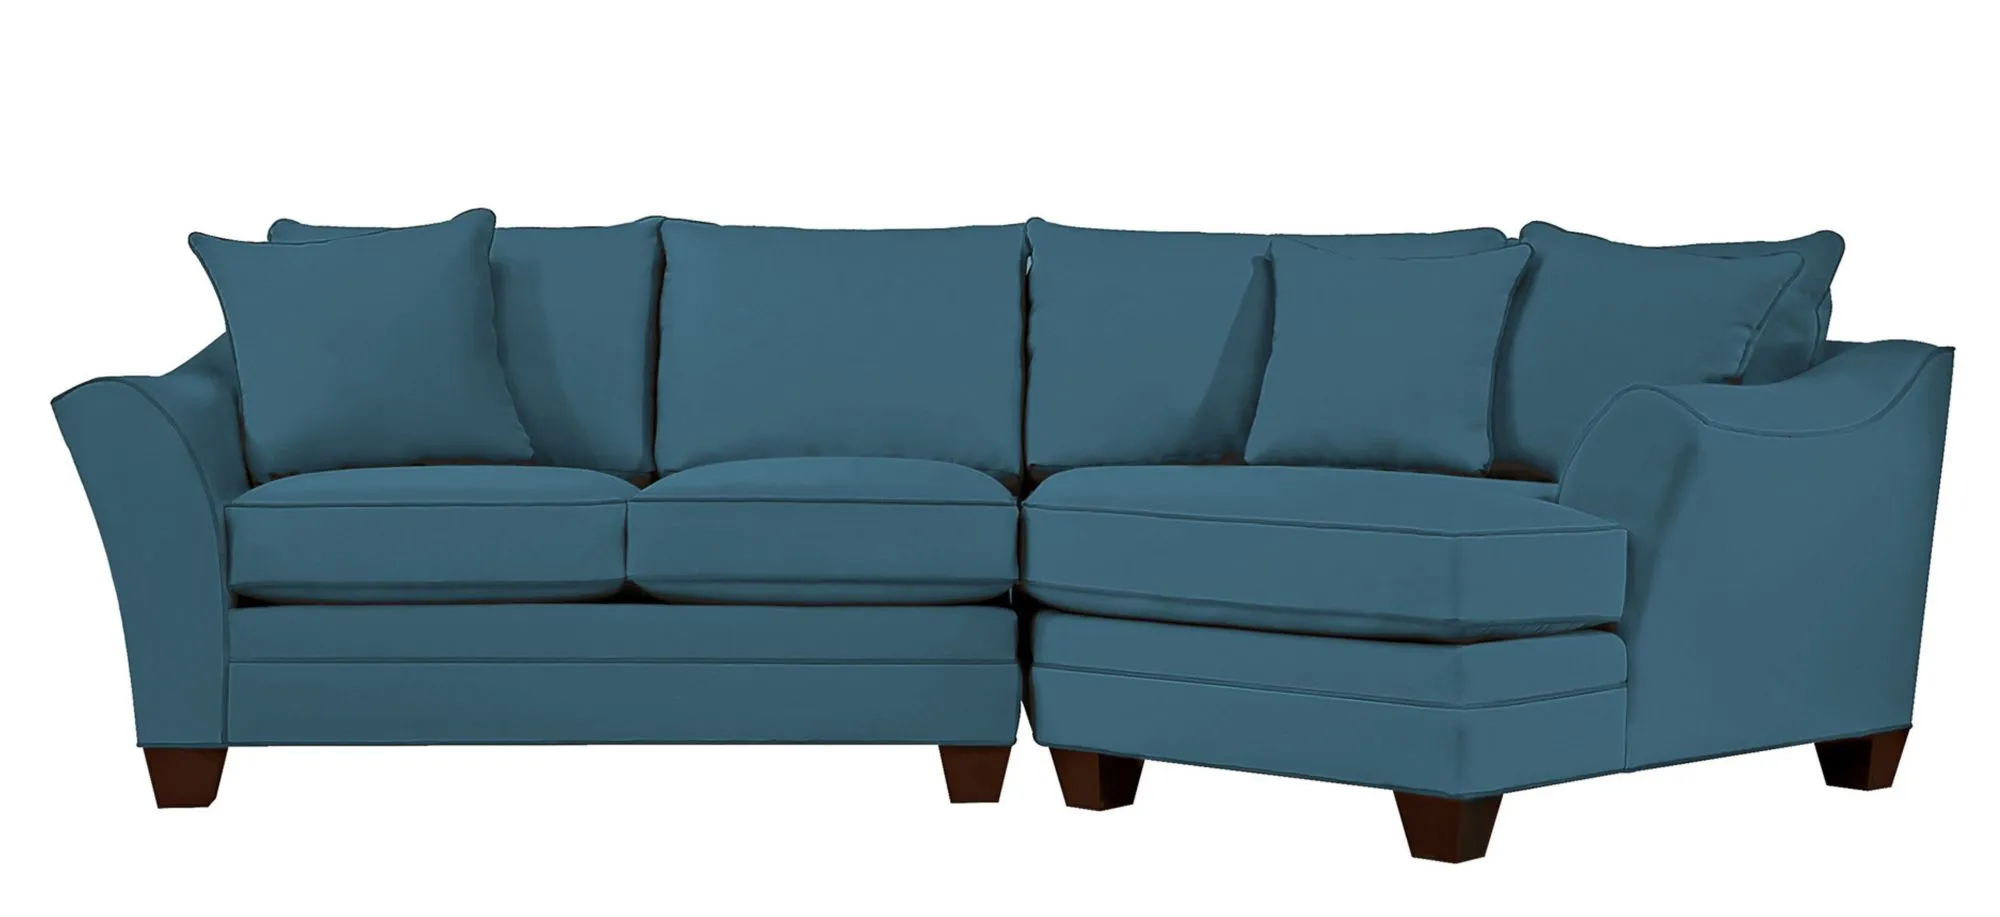 Foresthill 2-pc. Right Hand Cuddler Sectional Sofa in Suede So Soft Lagoon by H.M. Richards